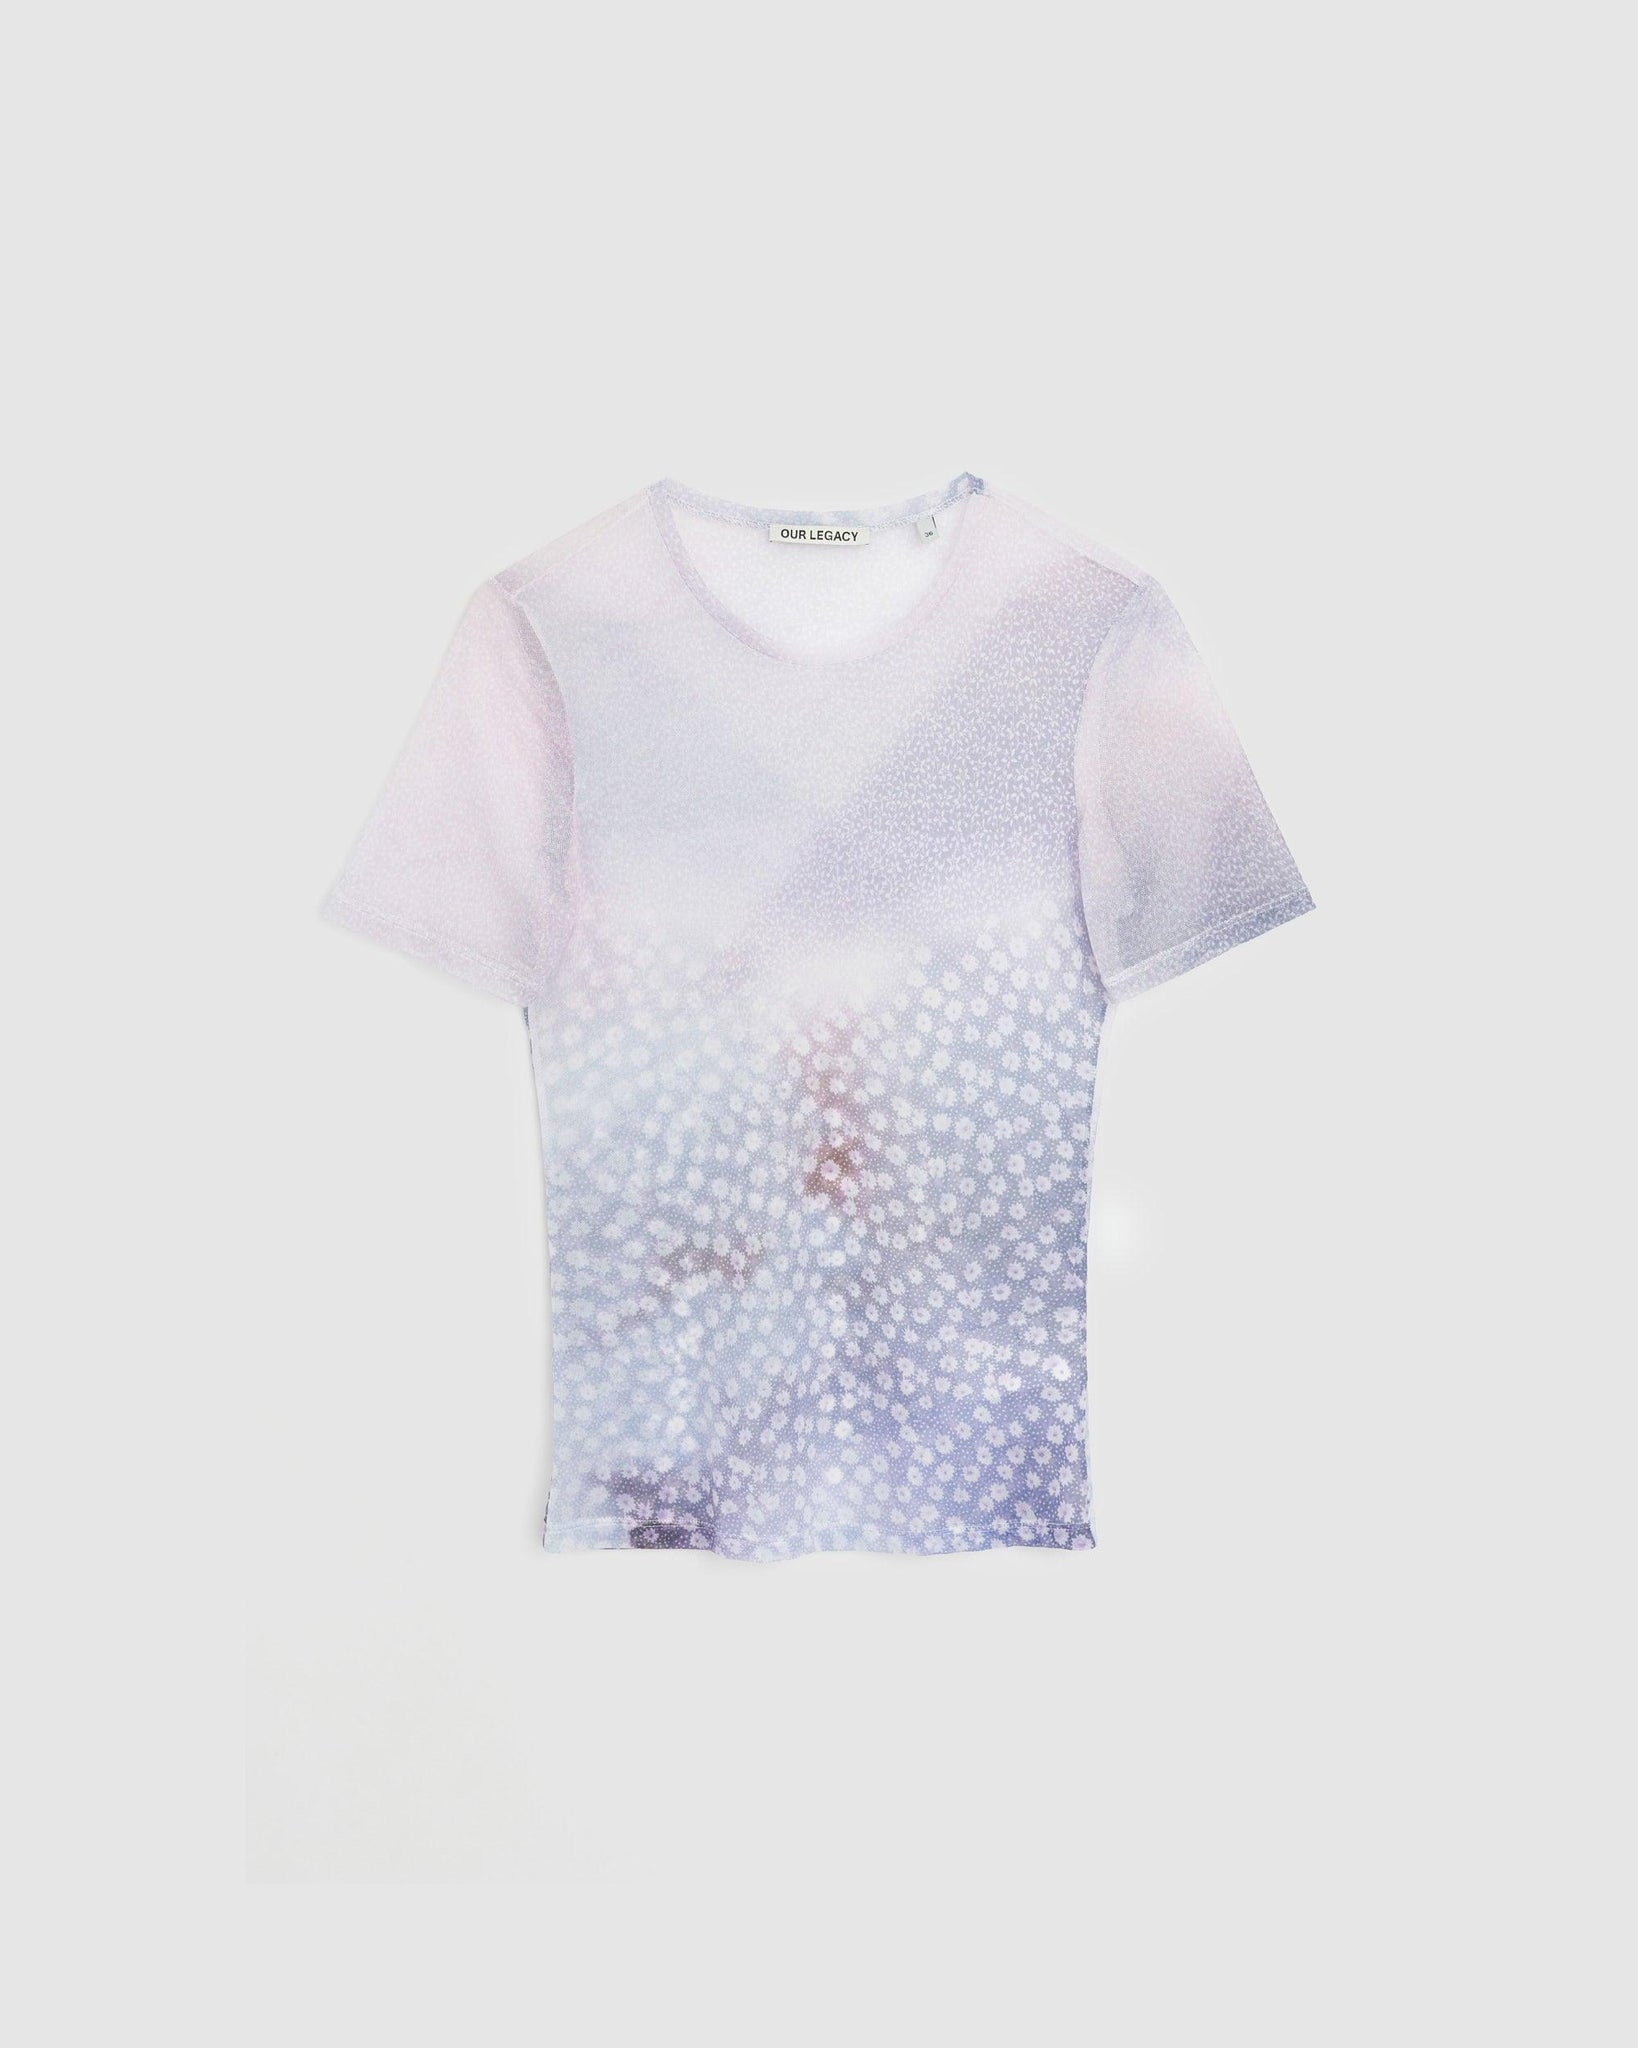 Super Slim T-Shirt Light Flowers Print - {{ collection.title }} - Chinatown Country Club 